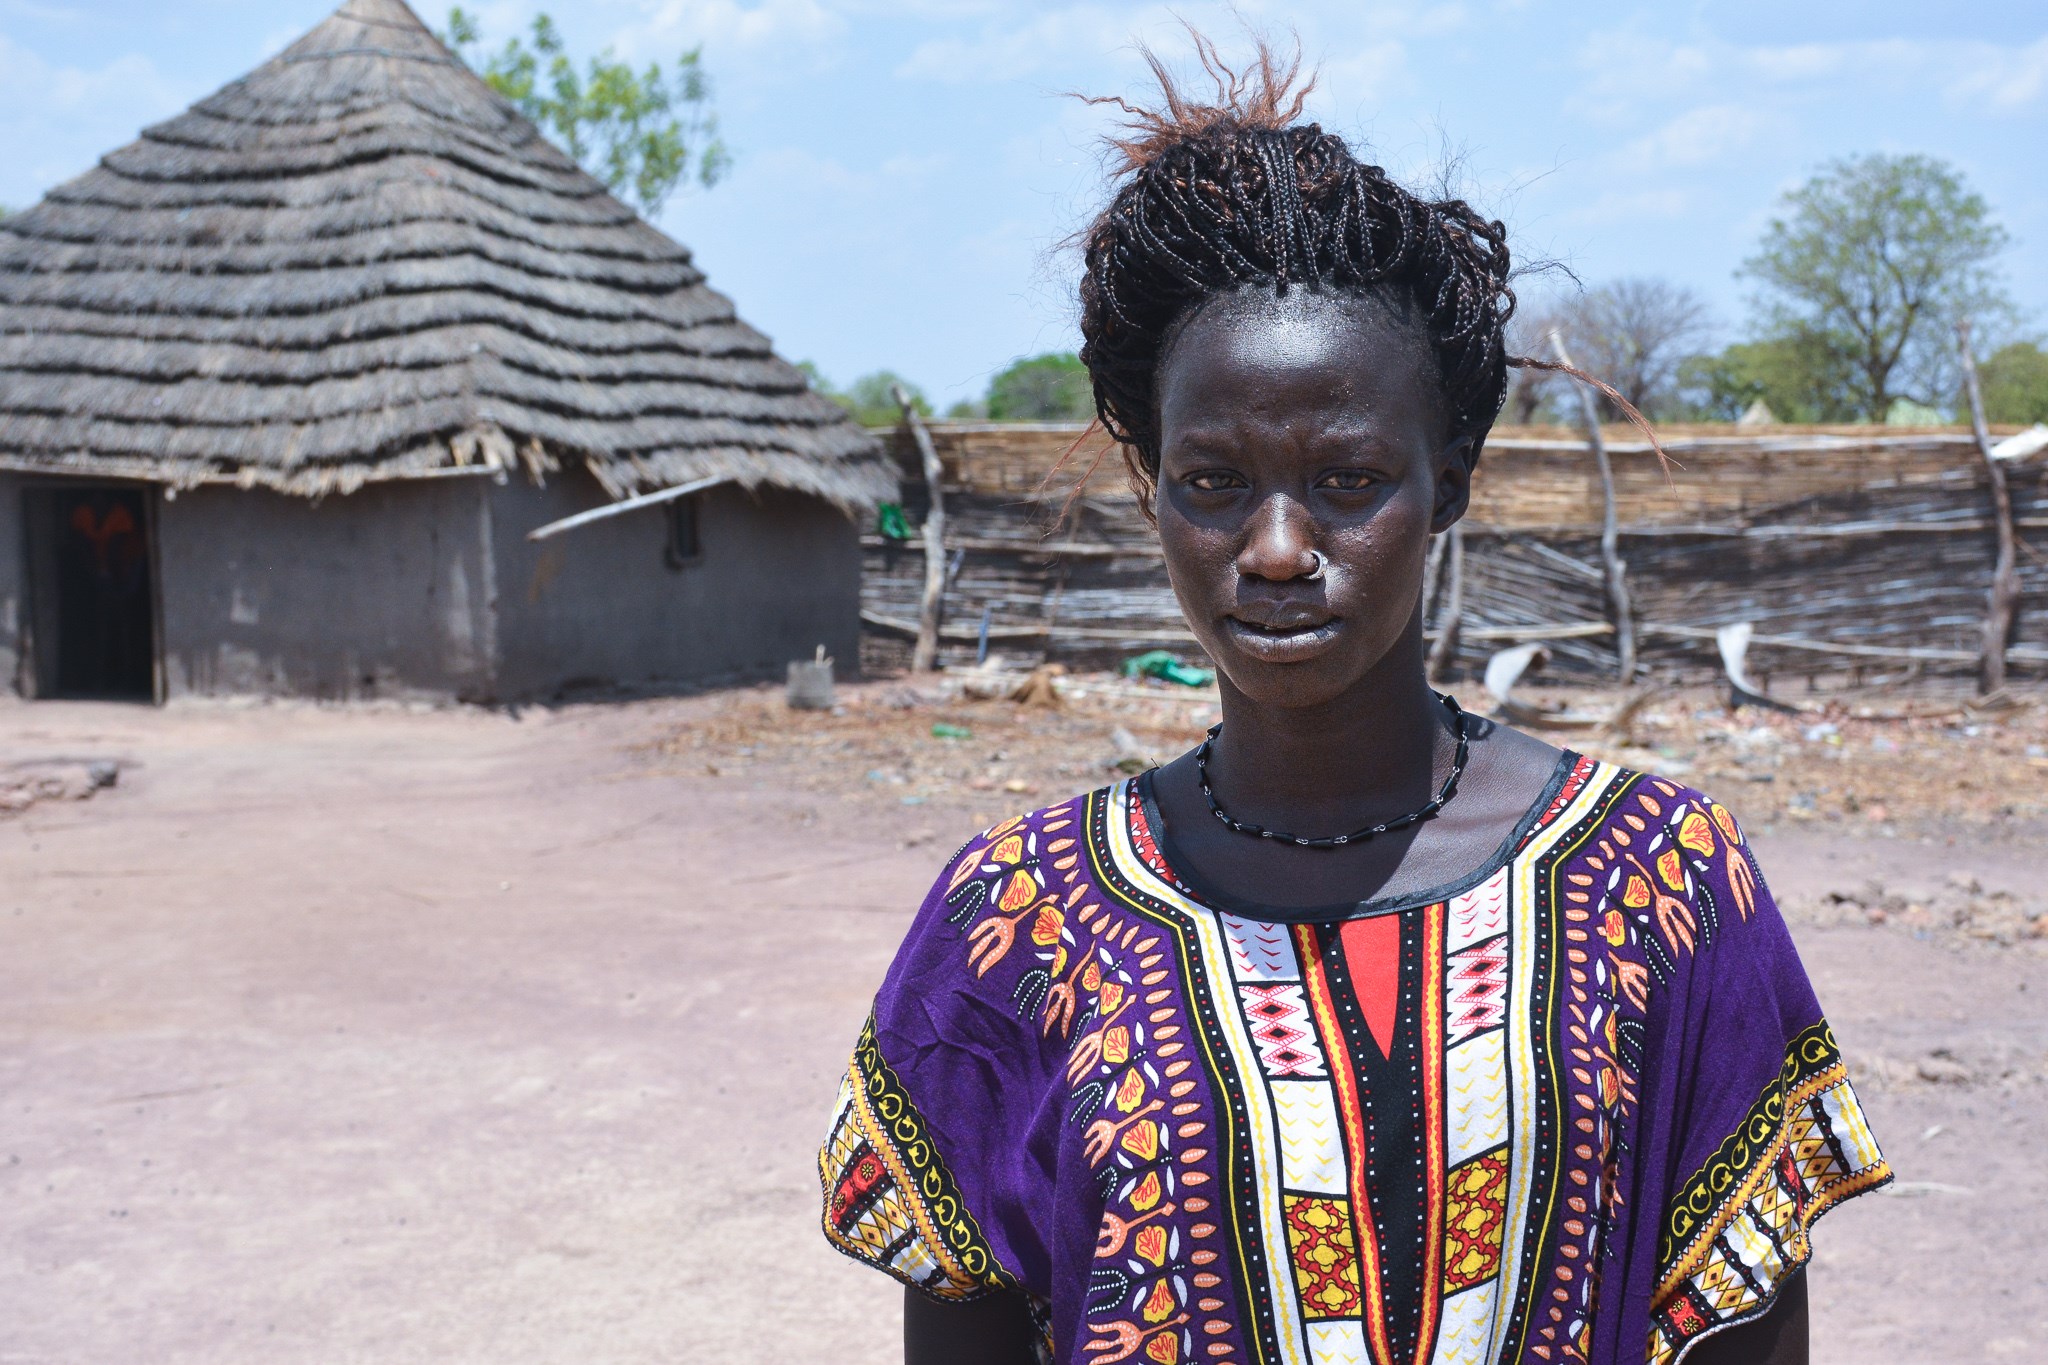 Hunger, COVID 19 and traditional practices force girls like Bakita in South Sudan to early marriage